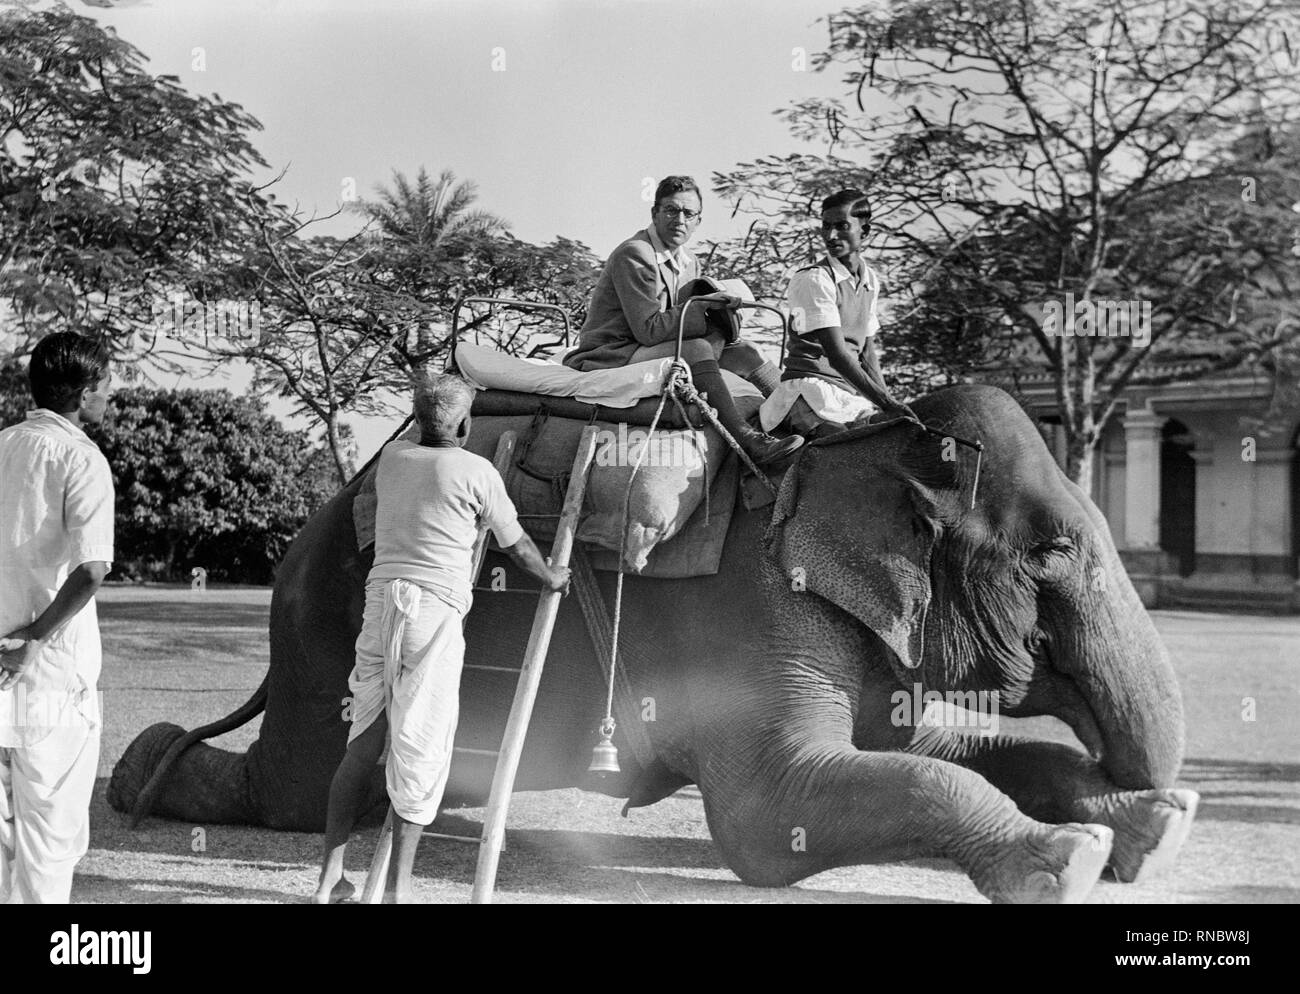 1930s black and white photograph showing a white European man getting on to an Elephant for a ride. Photograph taken in India. Stock Photo